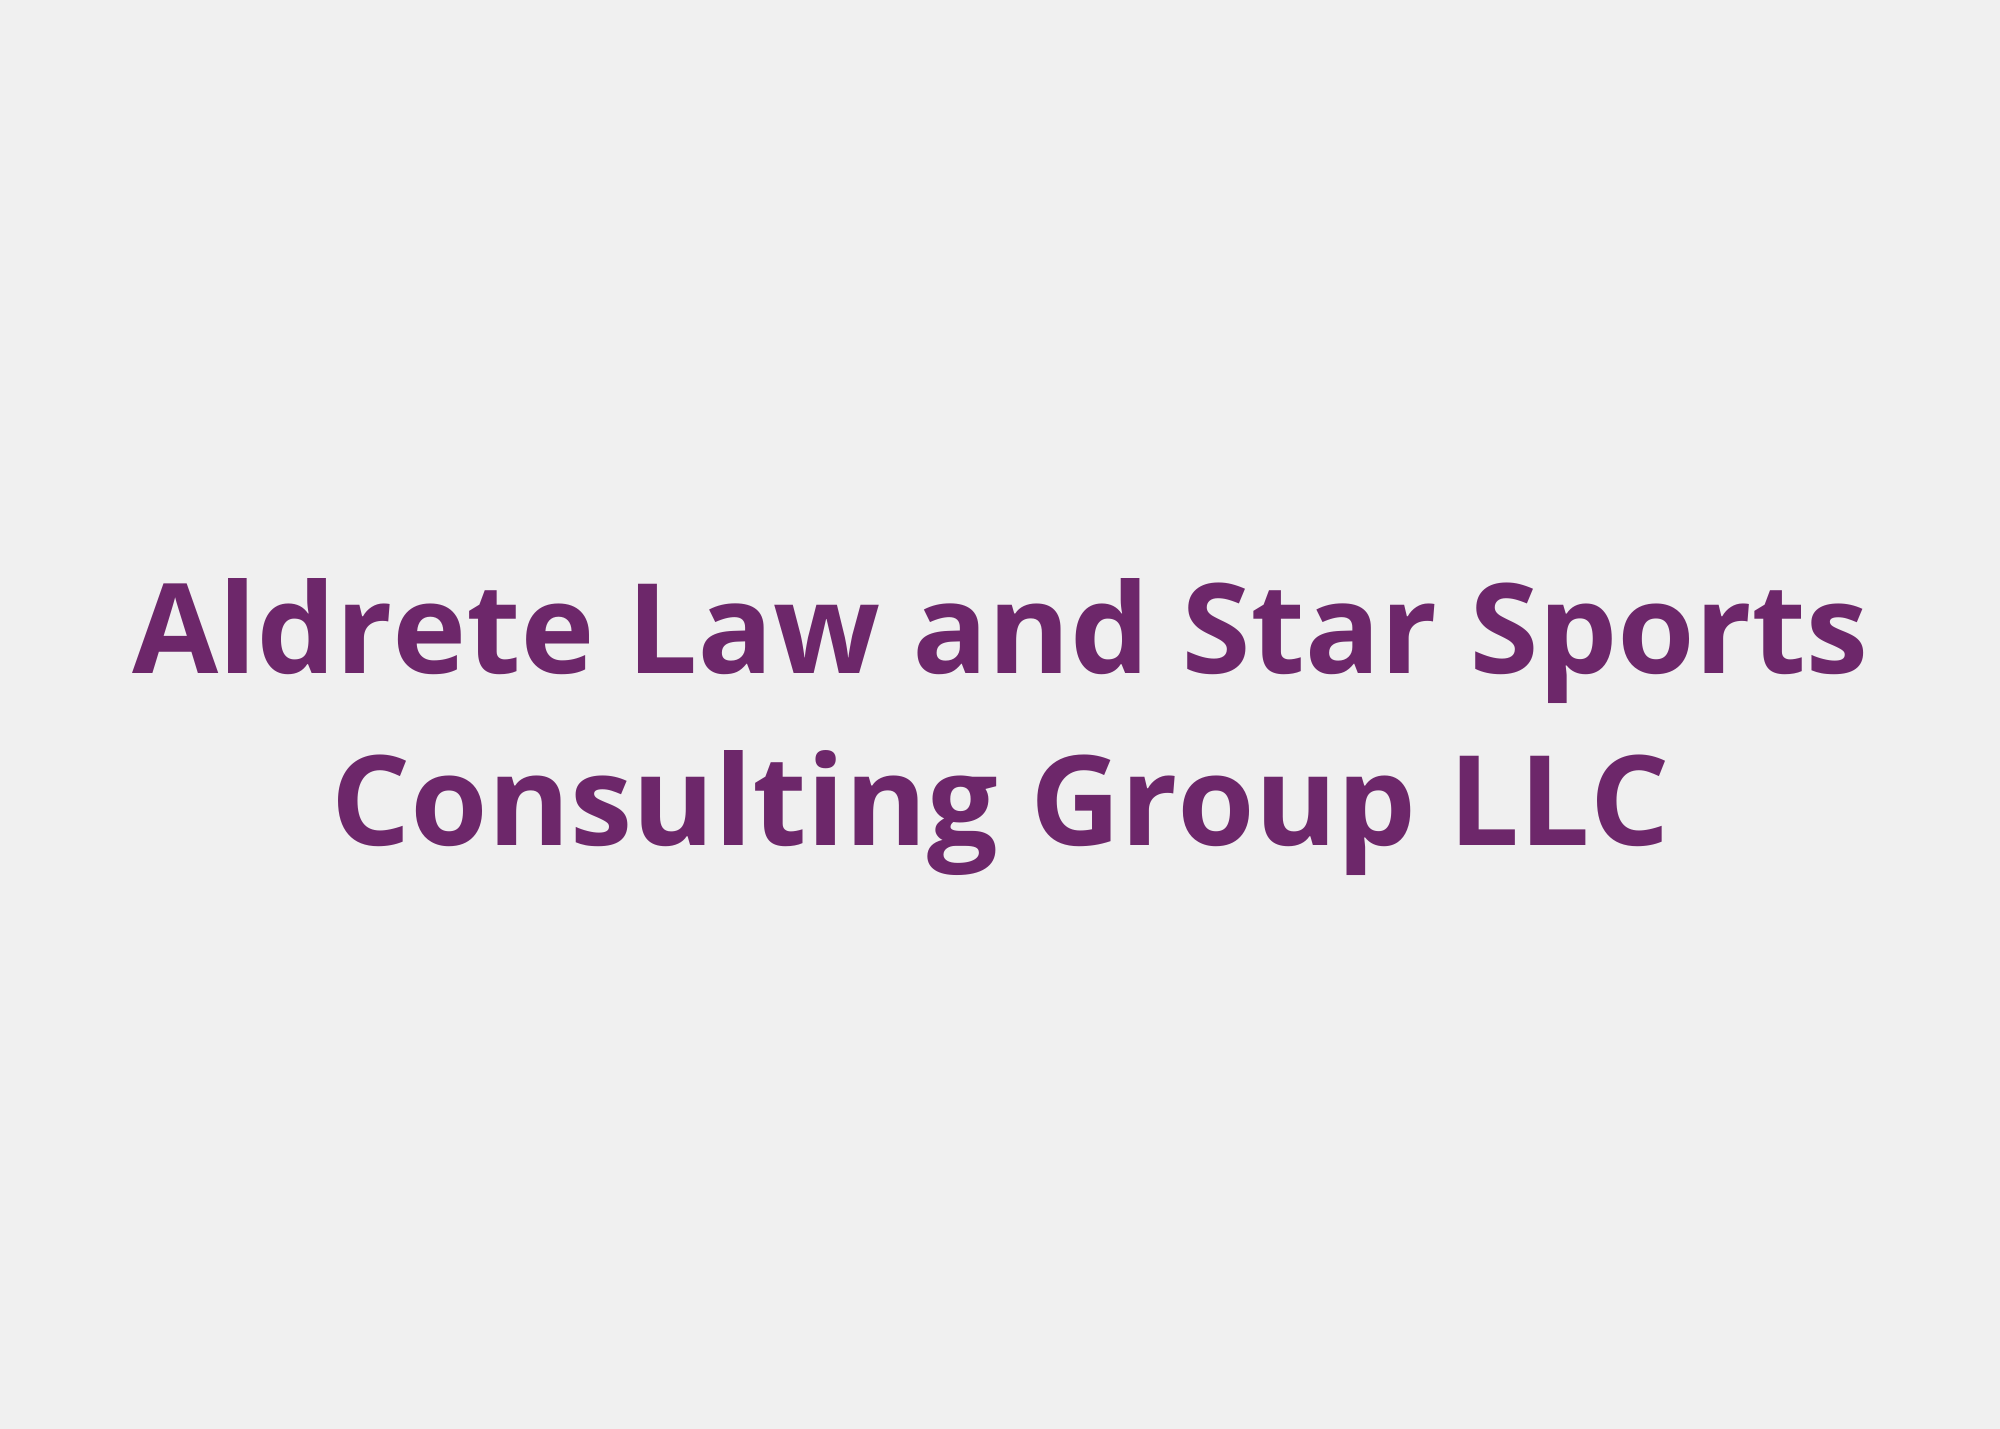 Aldrete Law and Star Sports Consulting Group LLC.png